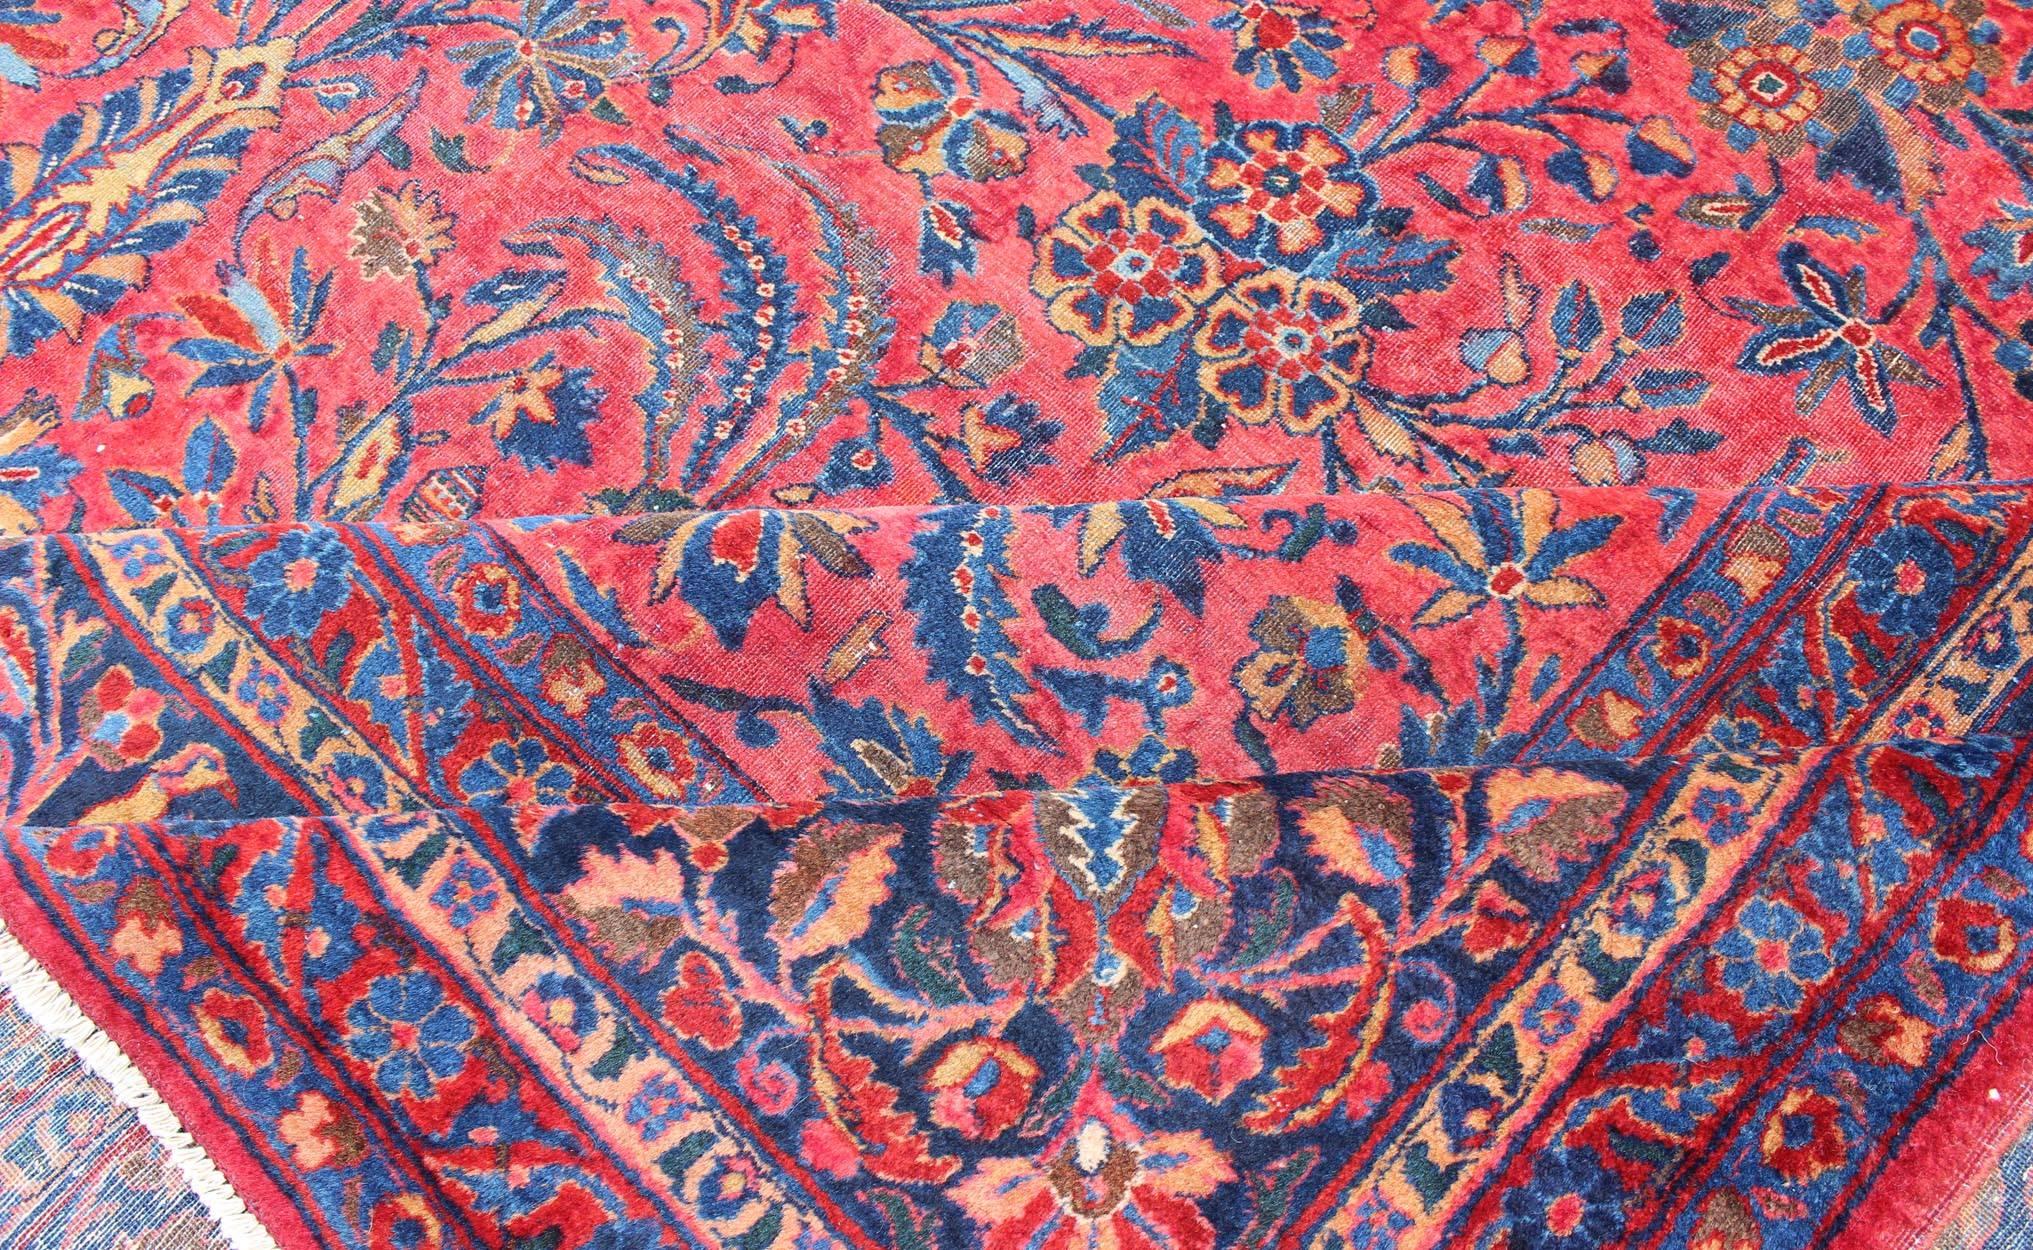 Antique Persian Kashan Rug With a All-Over Design On A Red Field and Blue Border In Good Condition For Sale In Atlanta, GA